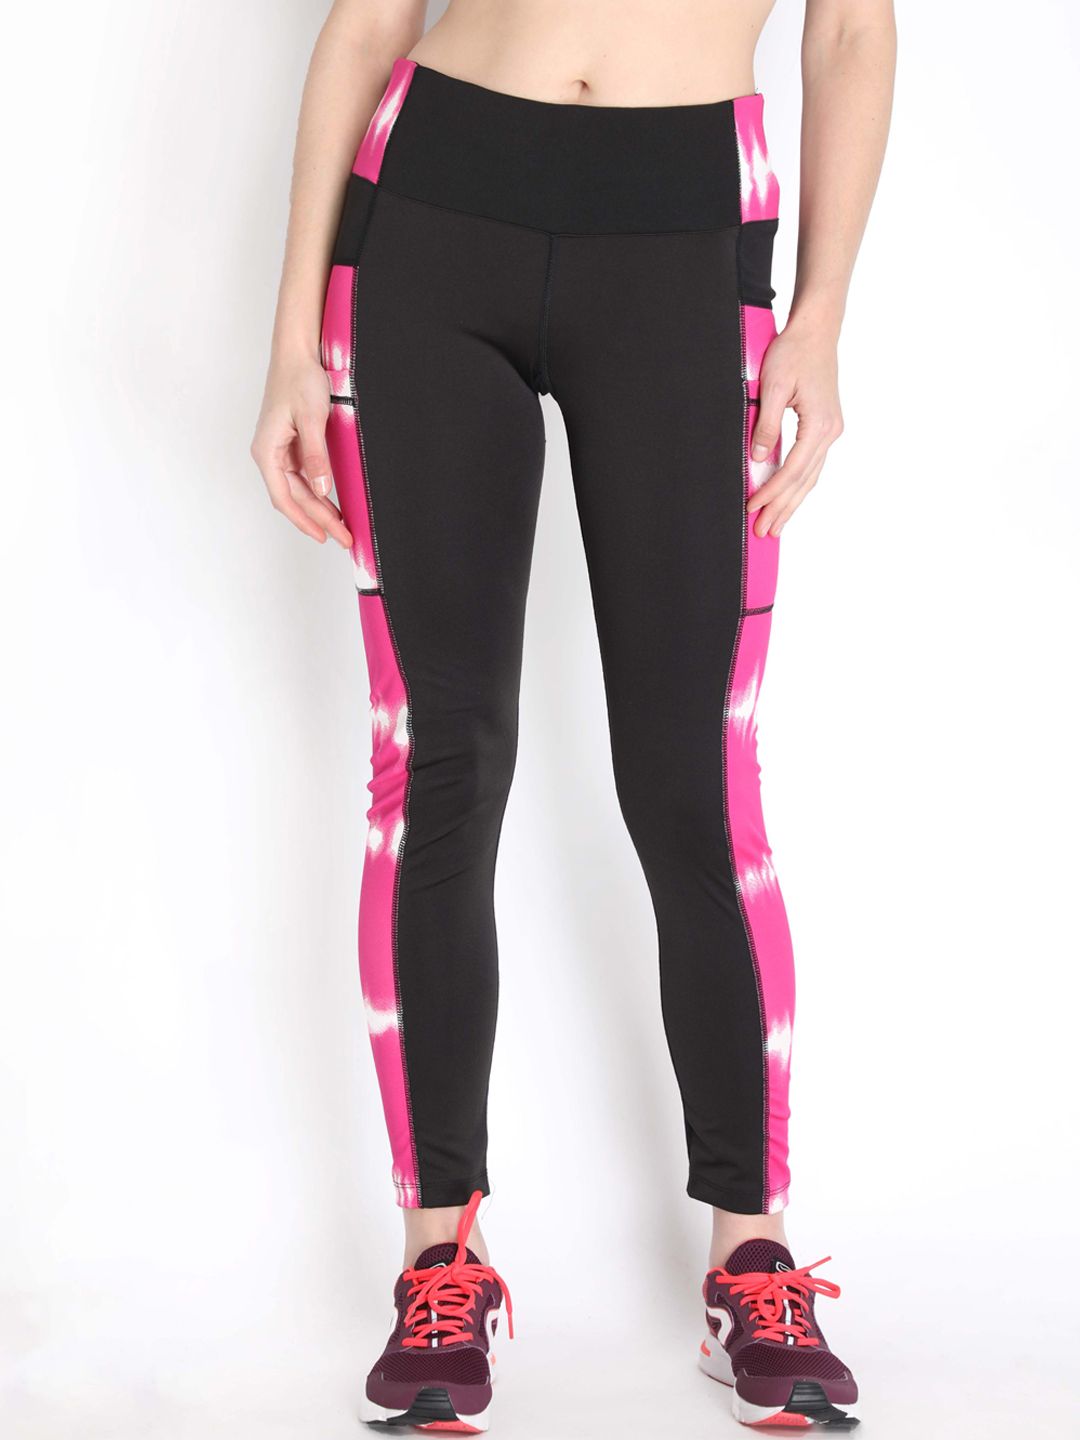 Chkokko Women Black & Pink Printed Stretchable Gym Tights Price in India